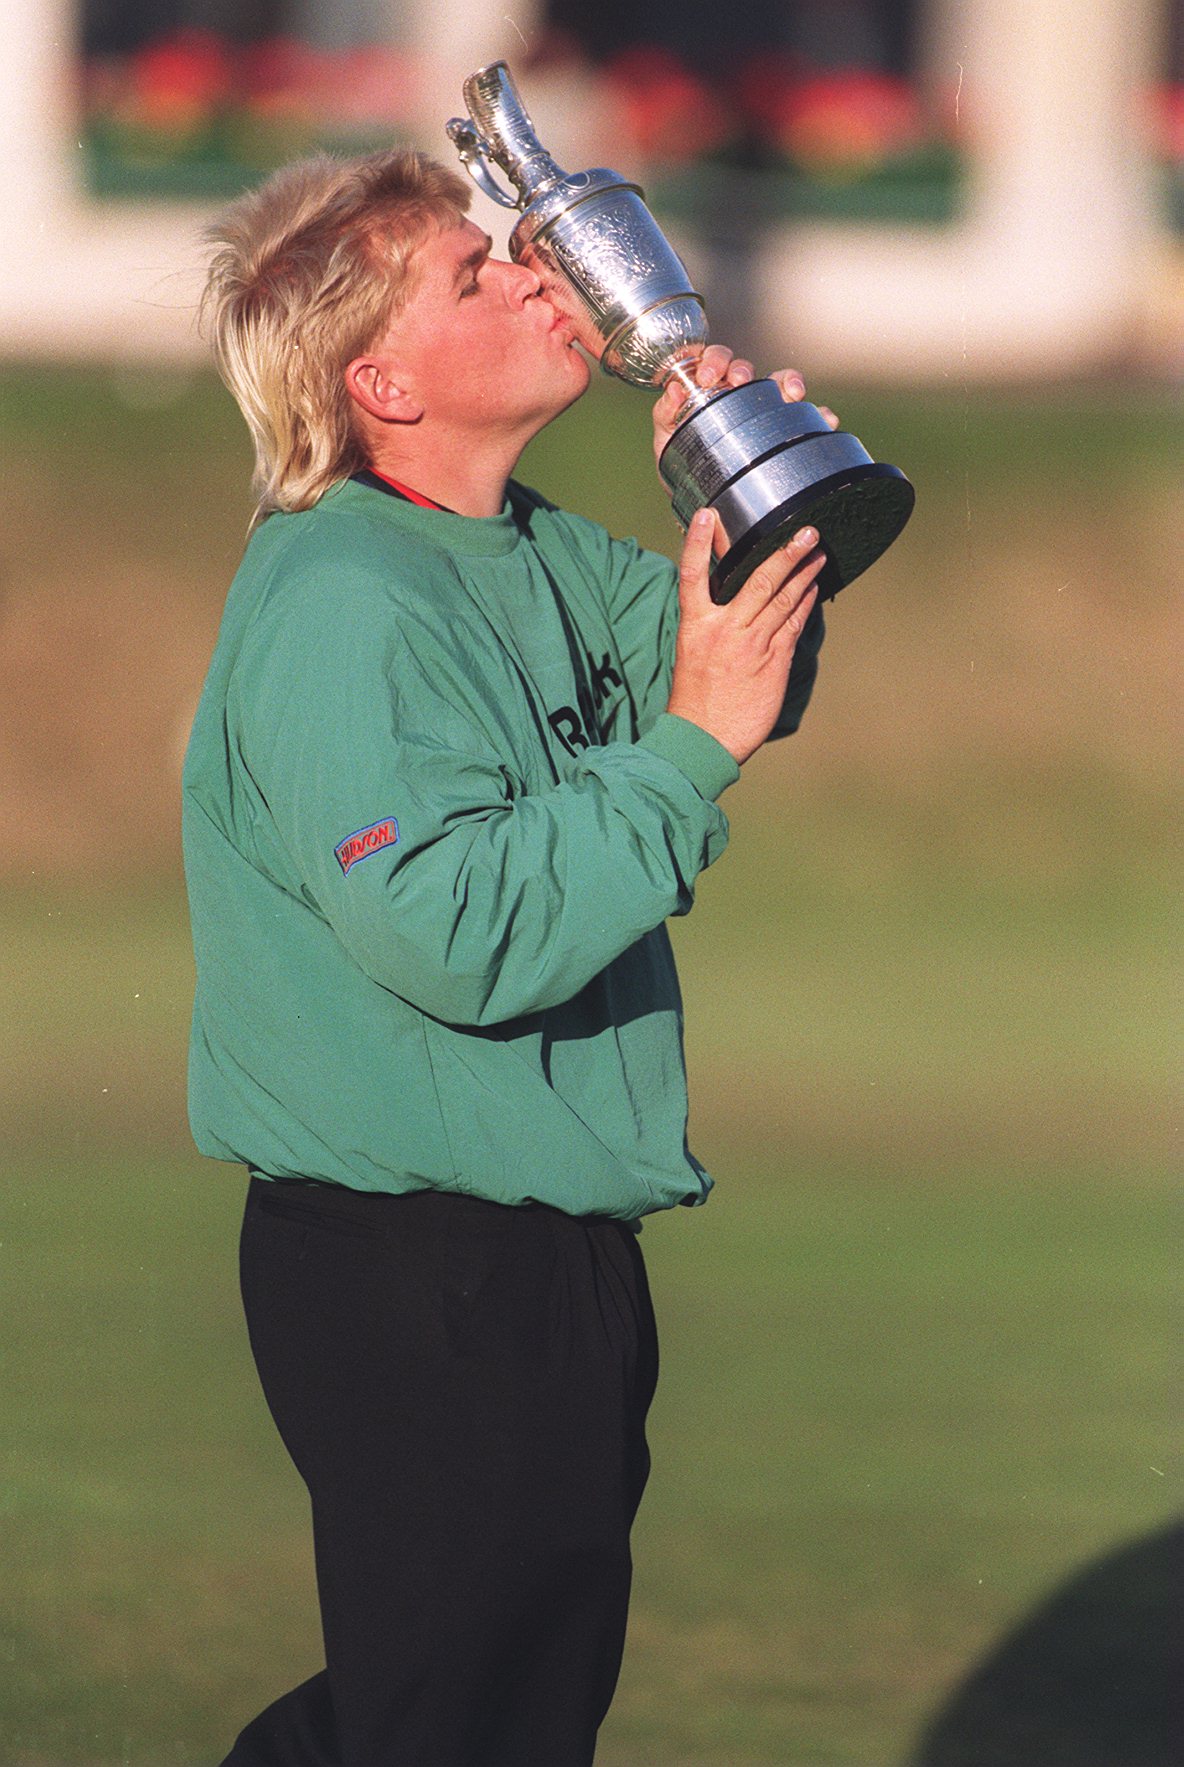 American golfer John Daly says he rejected a $1 million offer to thrown the 1995 British Open. | Mike Egerton/EMPICS via Getty Images